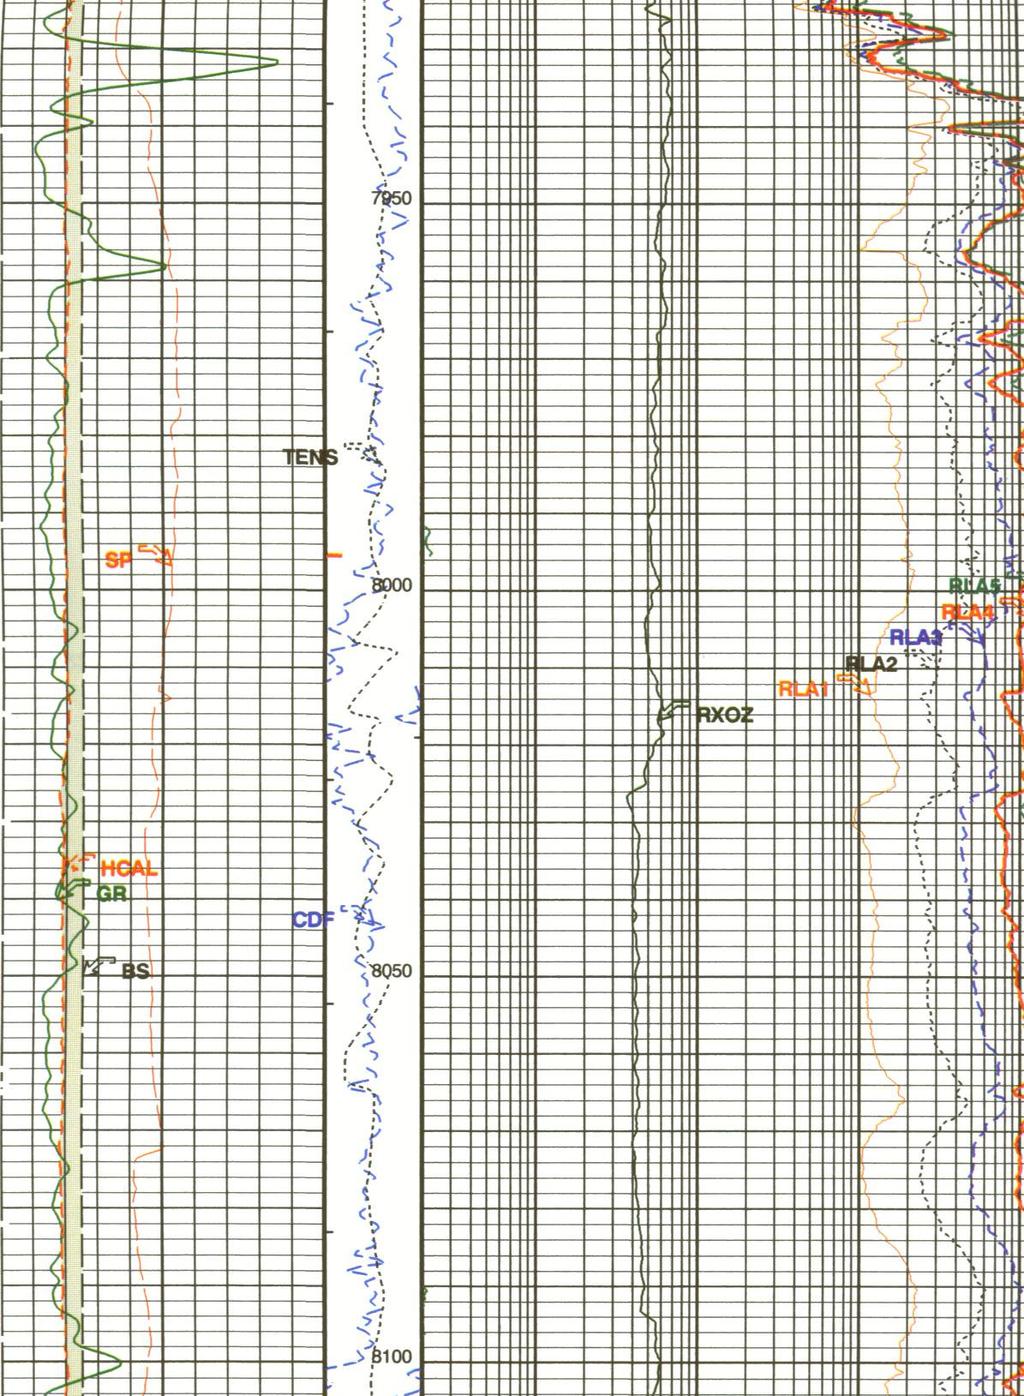 Here, the concentration of ULIF was allowed to deplete to an ineffective level and the invasion, as shown by the resistivity logs, increased to that of the mud without the ULIF